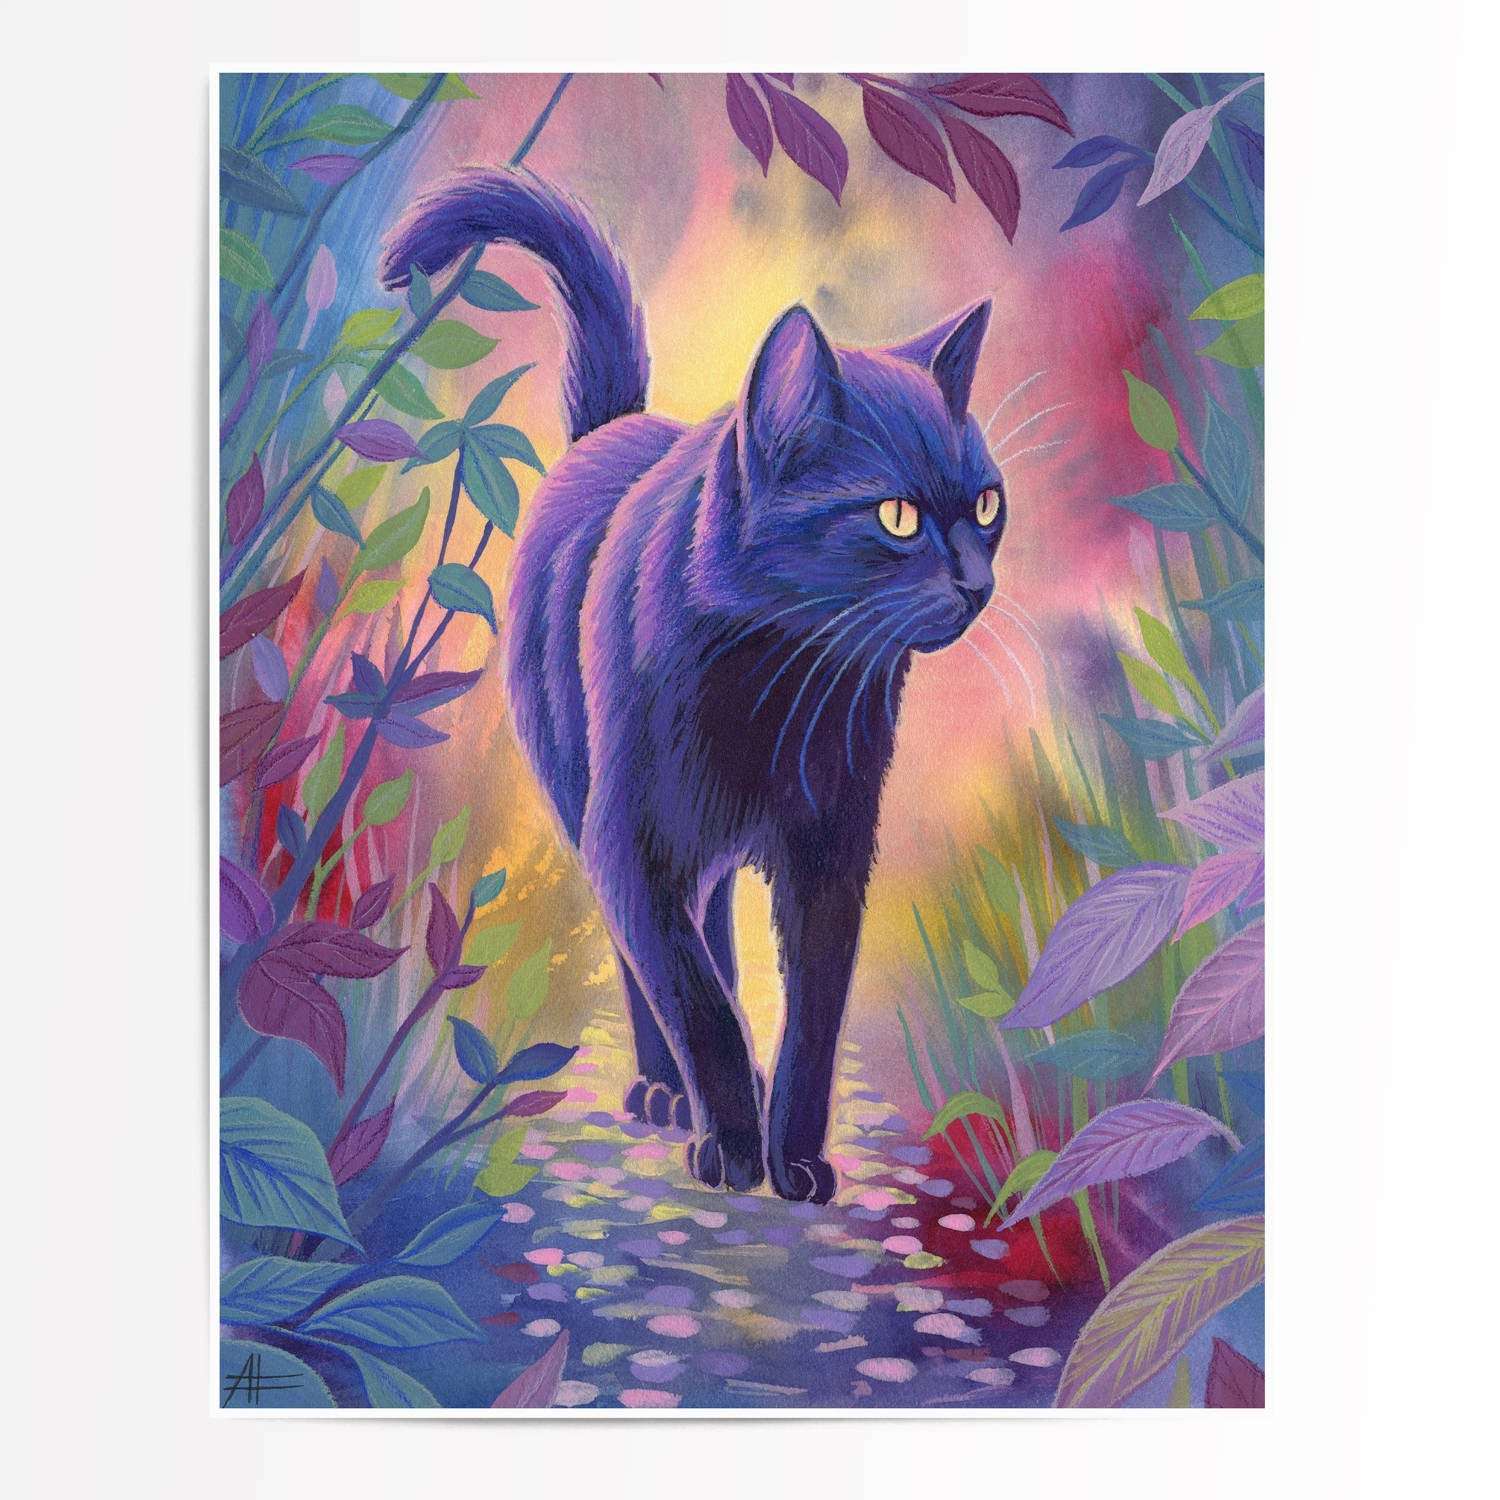 Illustration of a purple cat walking on a colorful, leaf-strewn path surrounded by vibrant foliage under a dusky sky from the Twilight Watch - Fine Art Print Bundle.